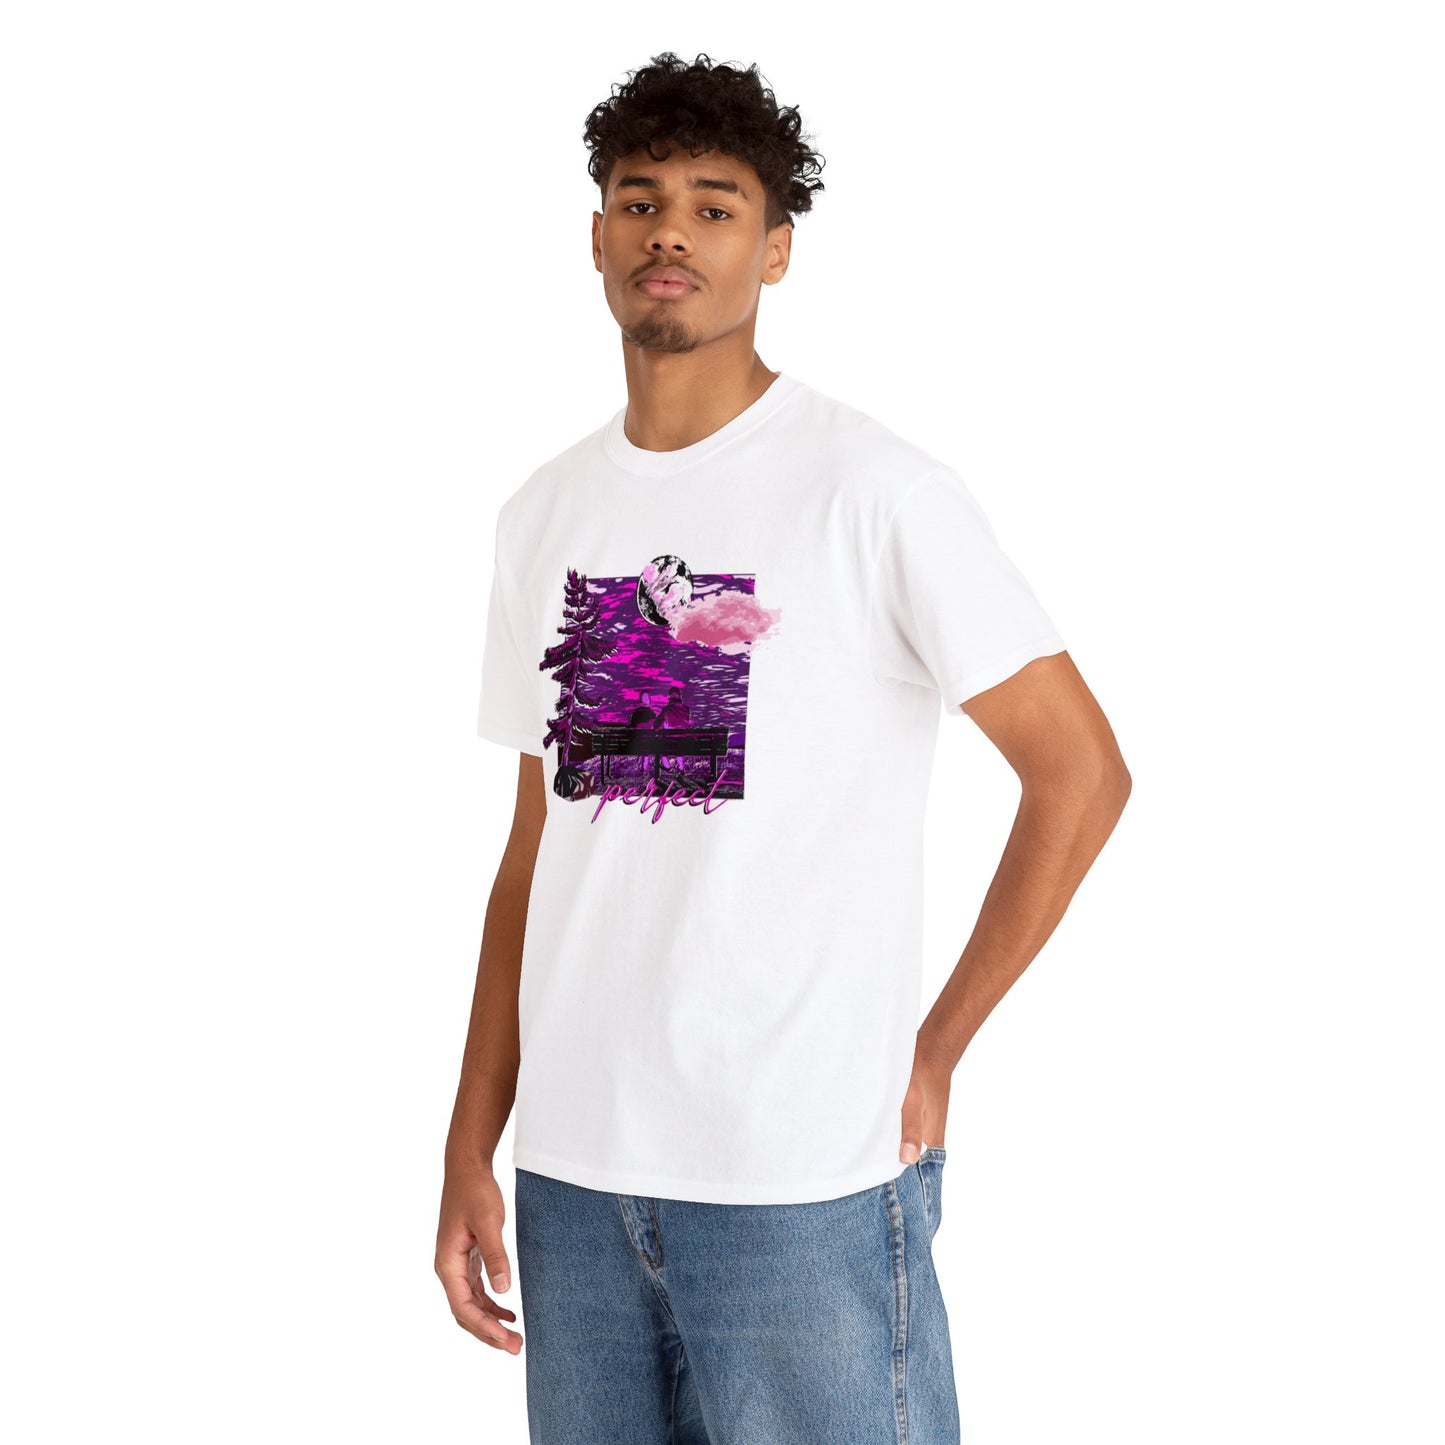 "Lookout Point" Shirt